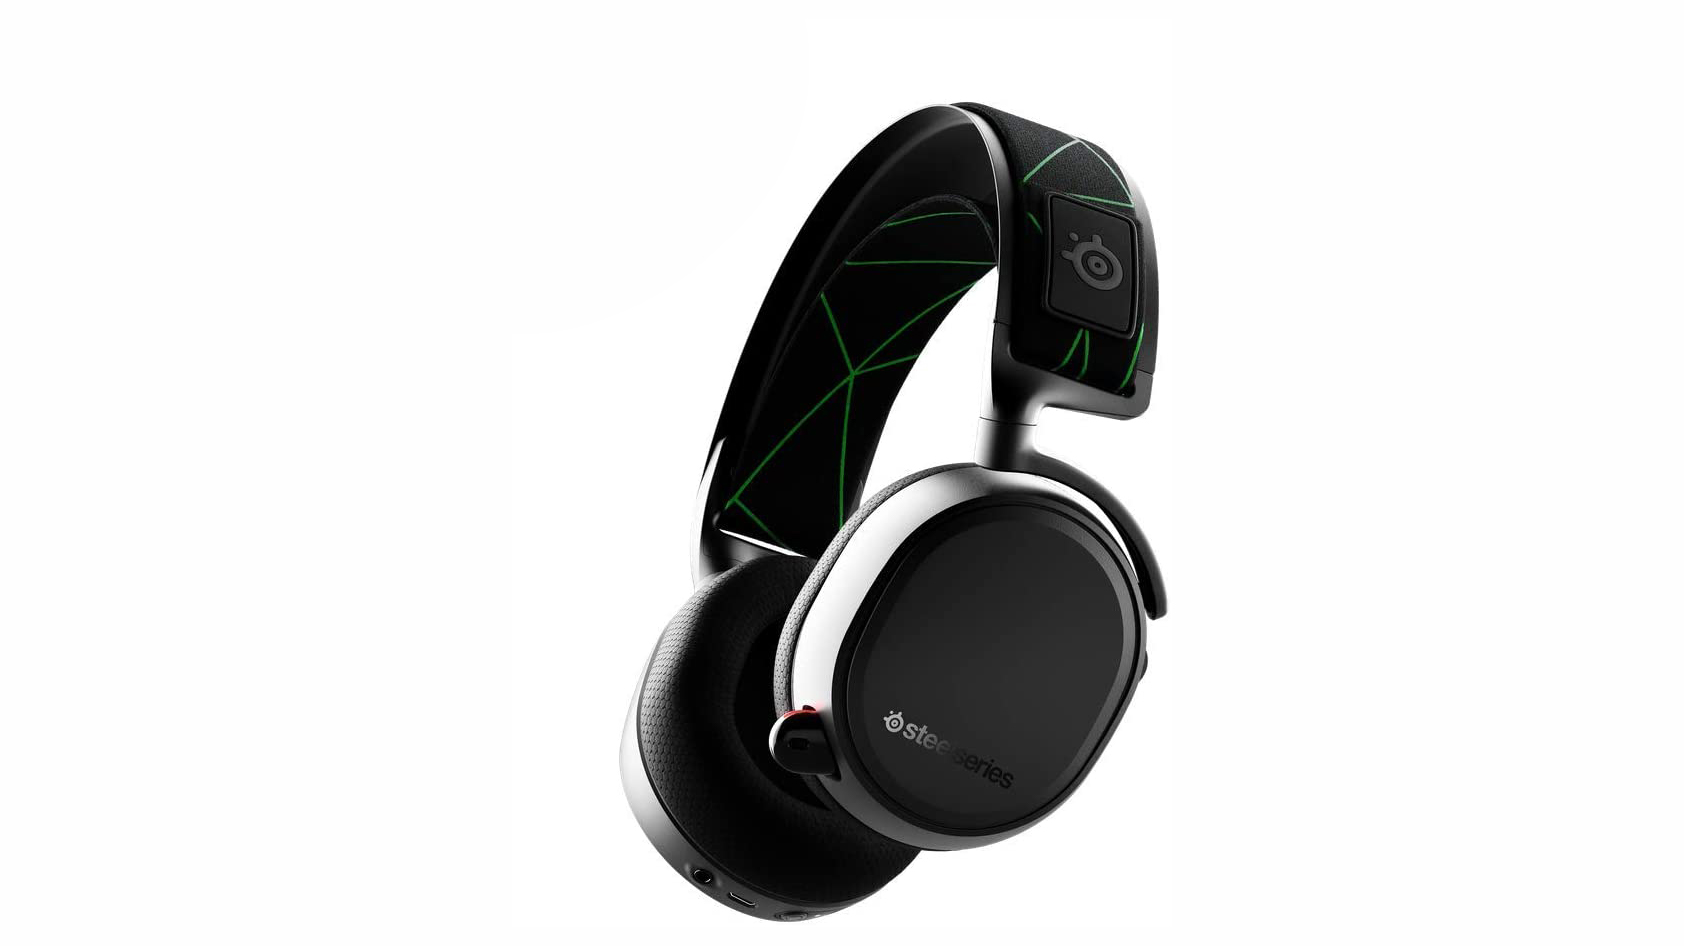 A product render of the Steelseries Arctis 9x gaming headset in black against a white background.